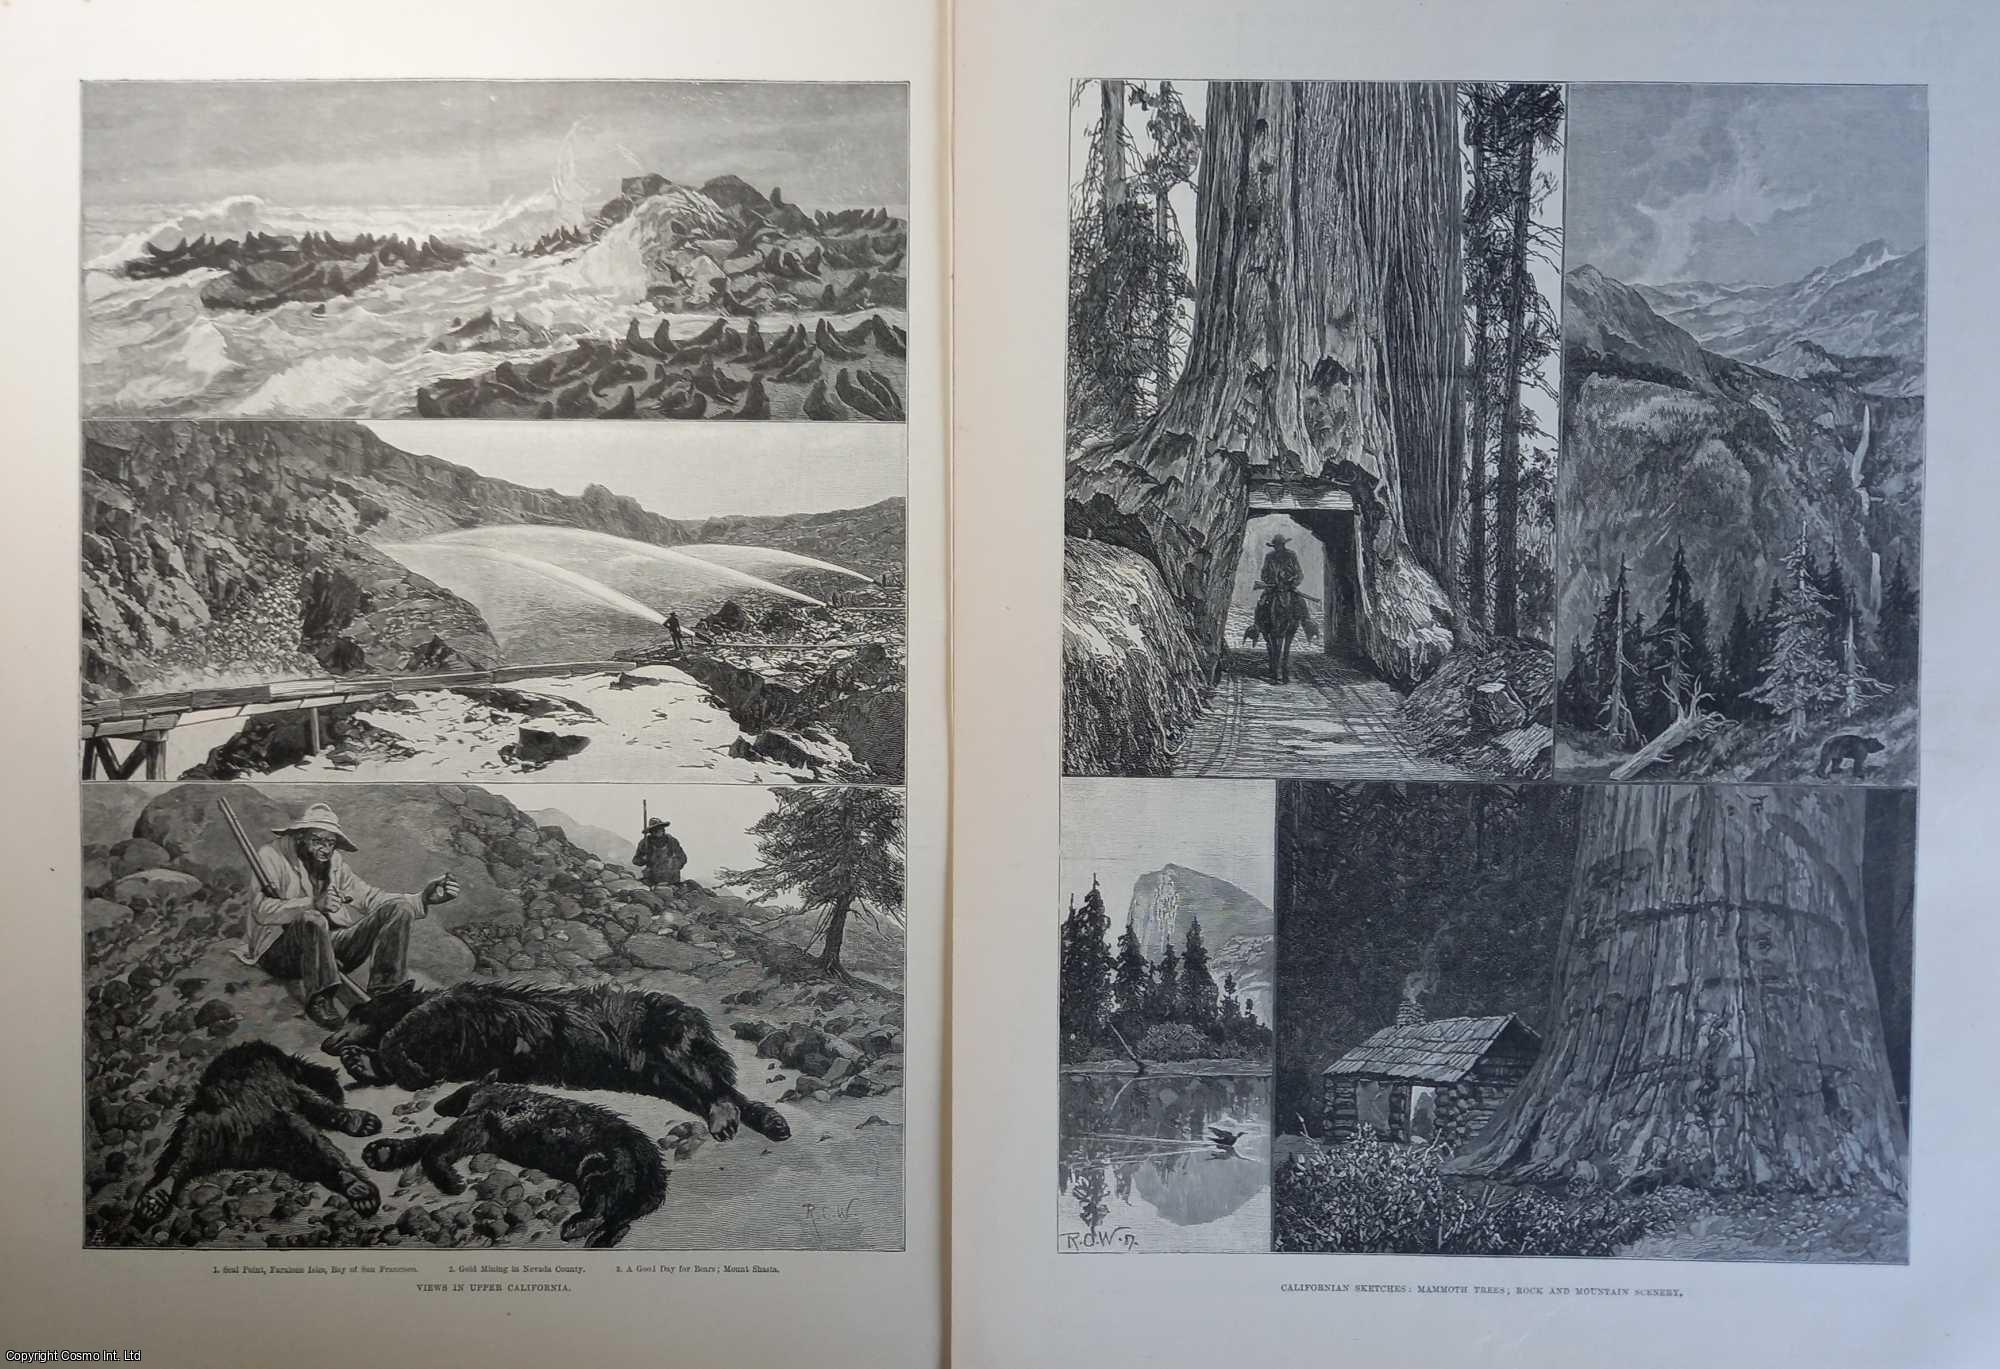 CALIFORNIA - California Sketches. Views of scenes in California. A collection of original illustrations from the Illustrated London News, 1888.